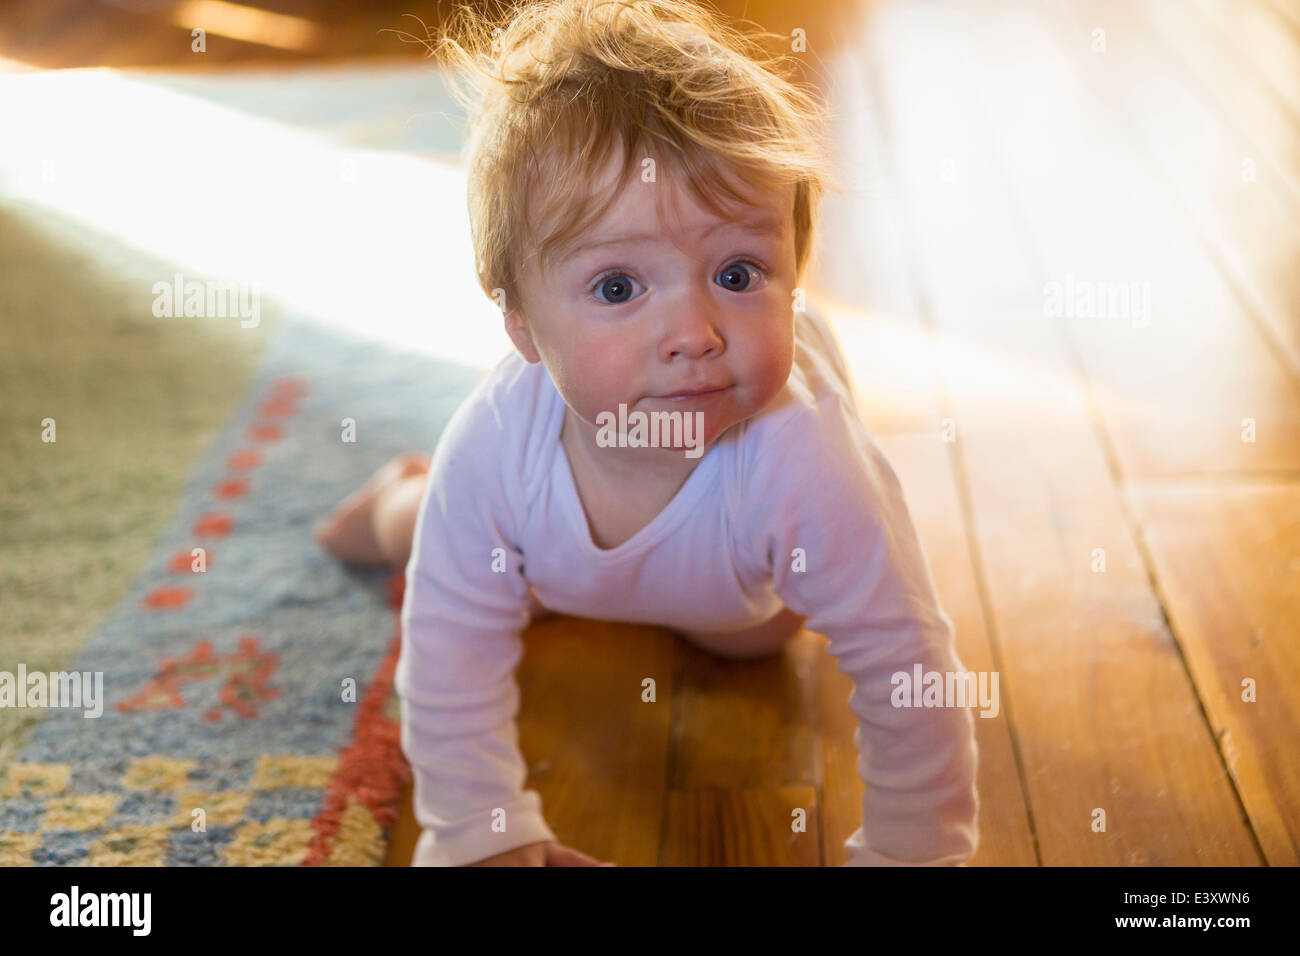 Caucasian baby crawling on floor Banque D'Images